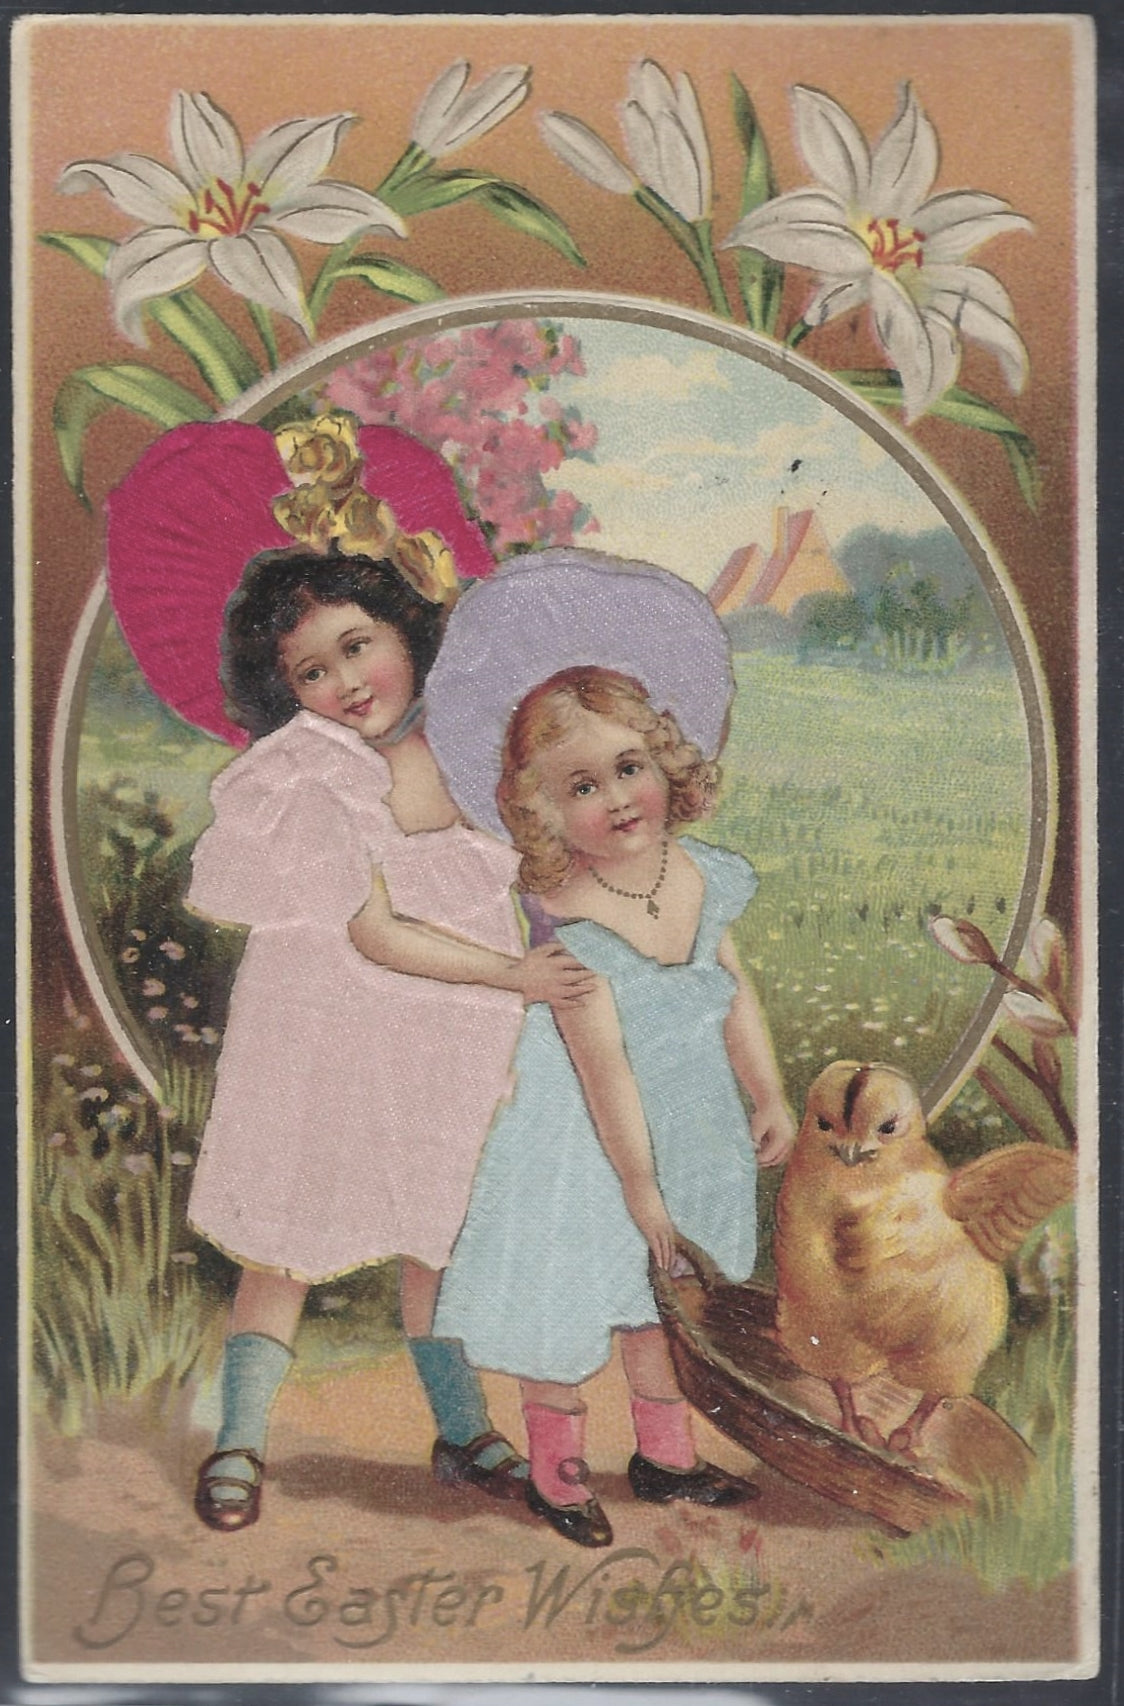 Easter Postcard Little Girls Dressed Up Pushing Cart with Baby Chick Silk Applied Printed in Germany